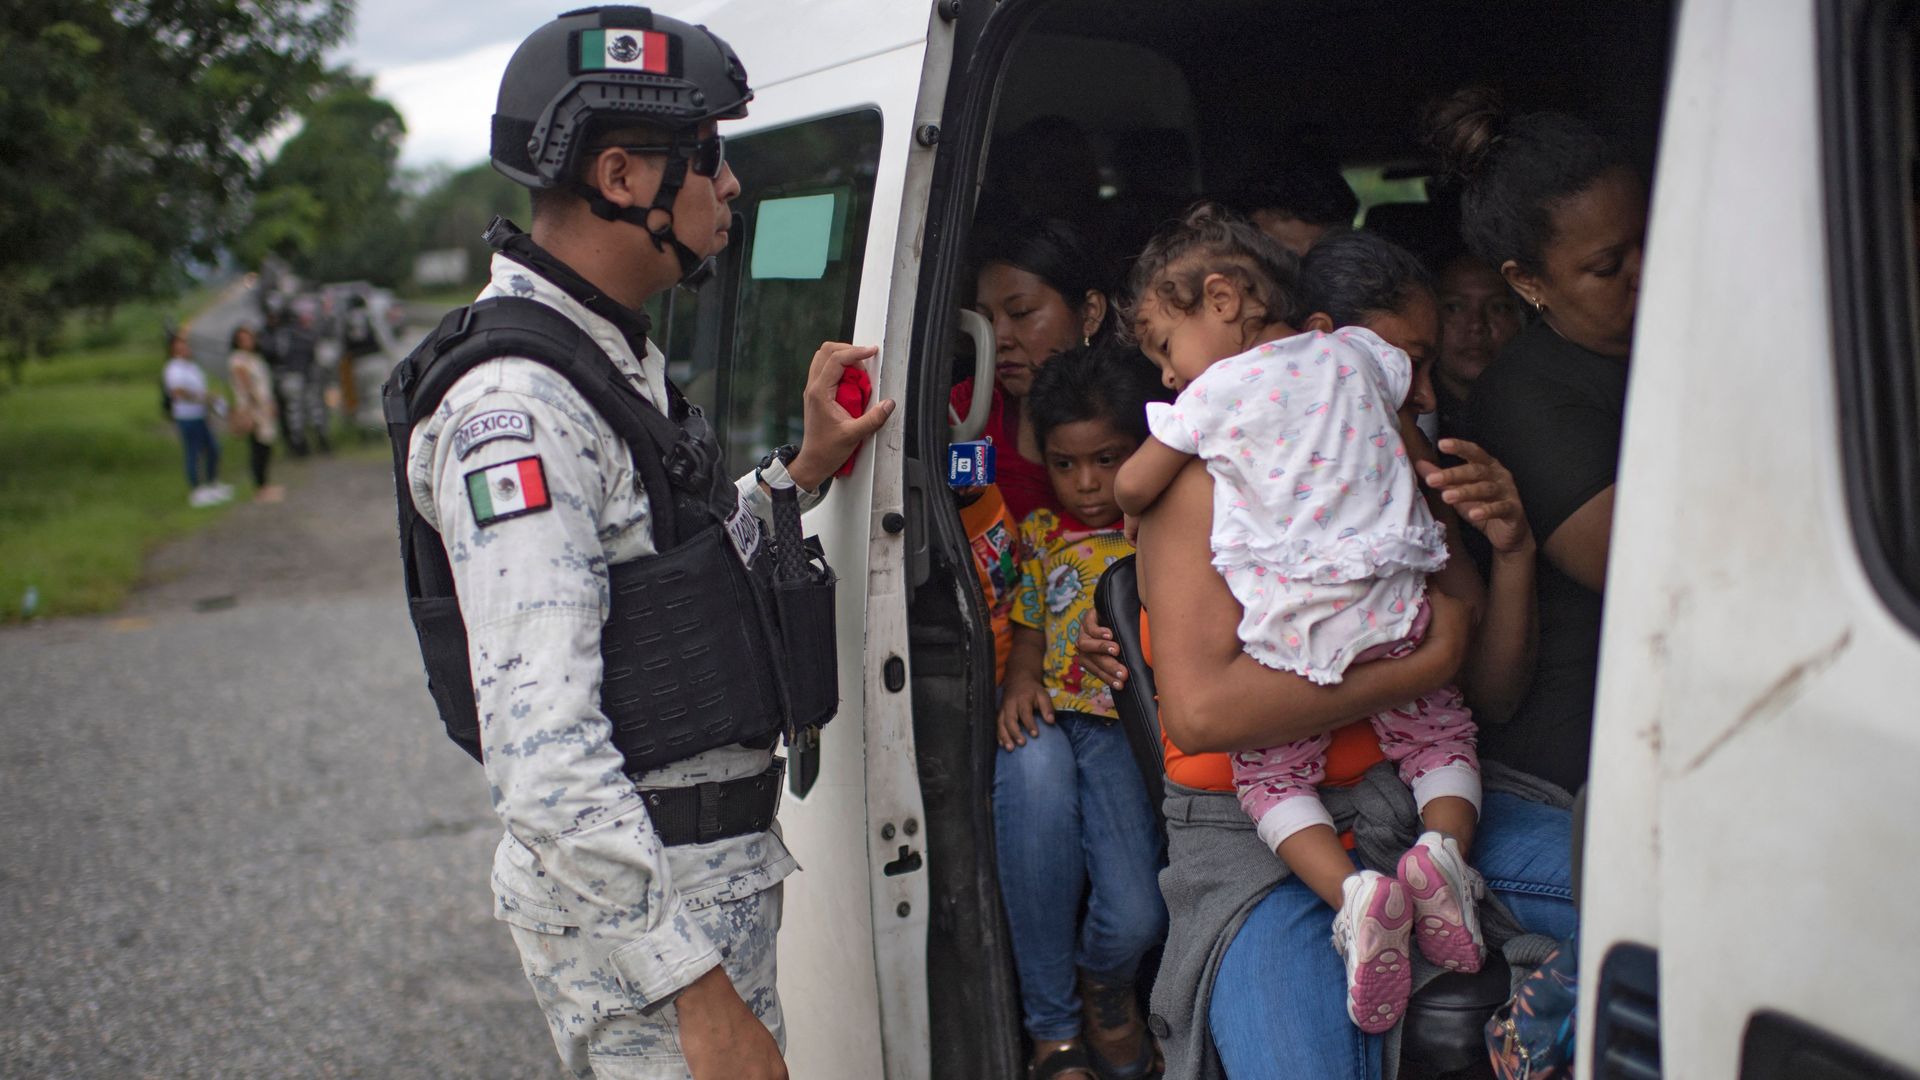 Members of Mexico's National Guard stop a public transport van to ask passengers for documents and find migrants taking part in a caravan heading to the US.